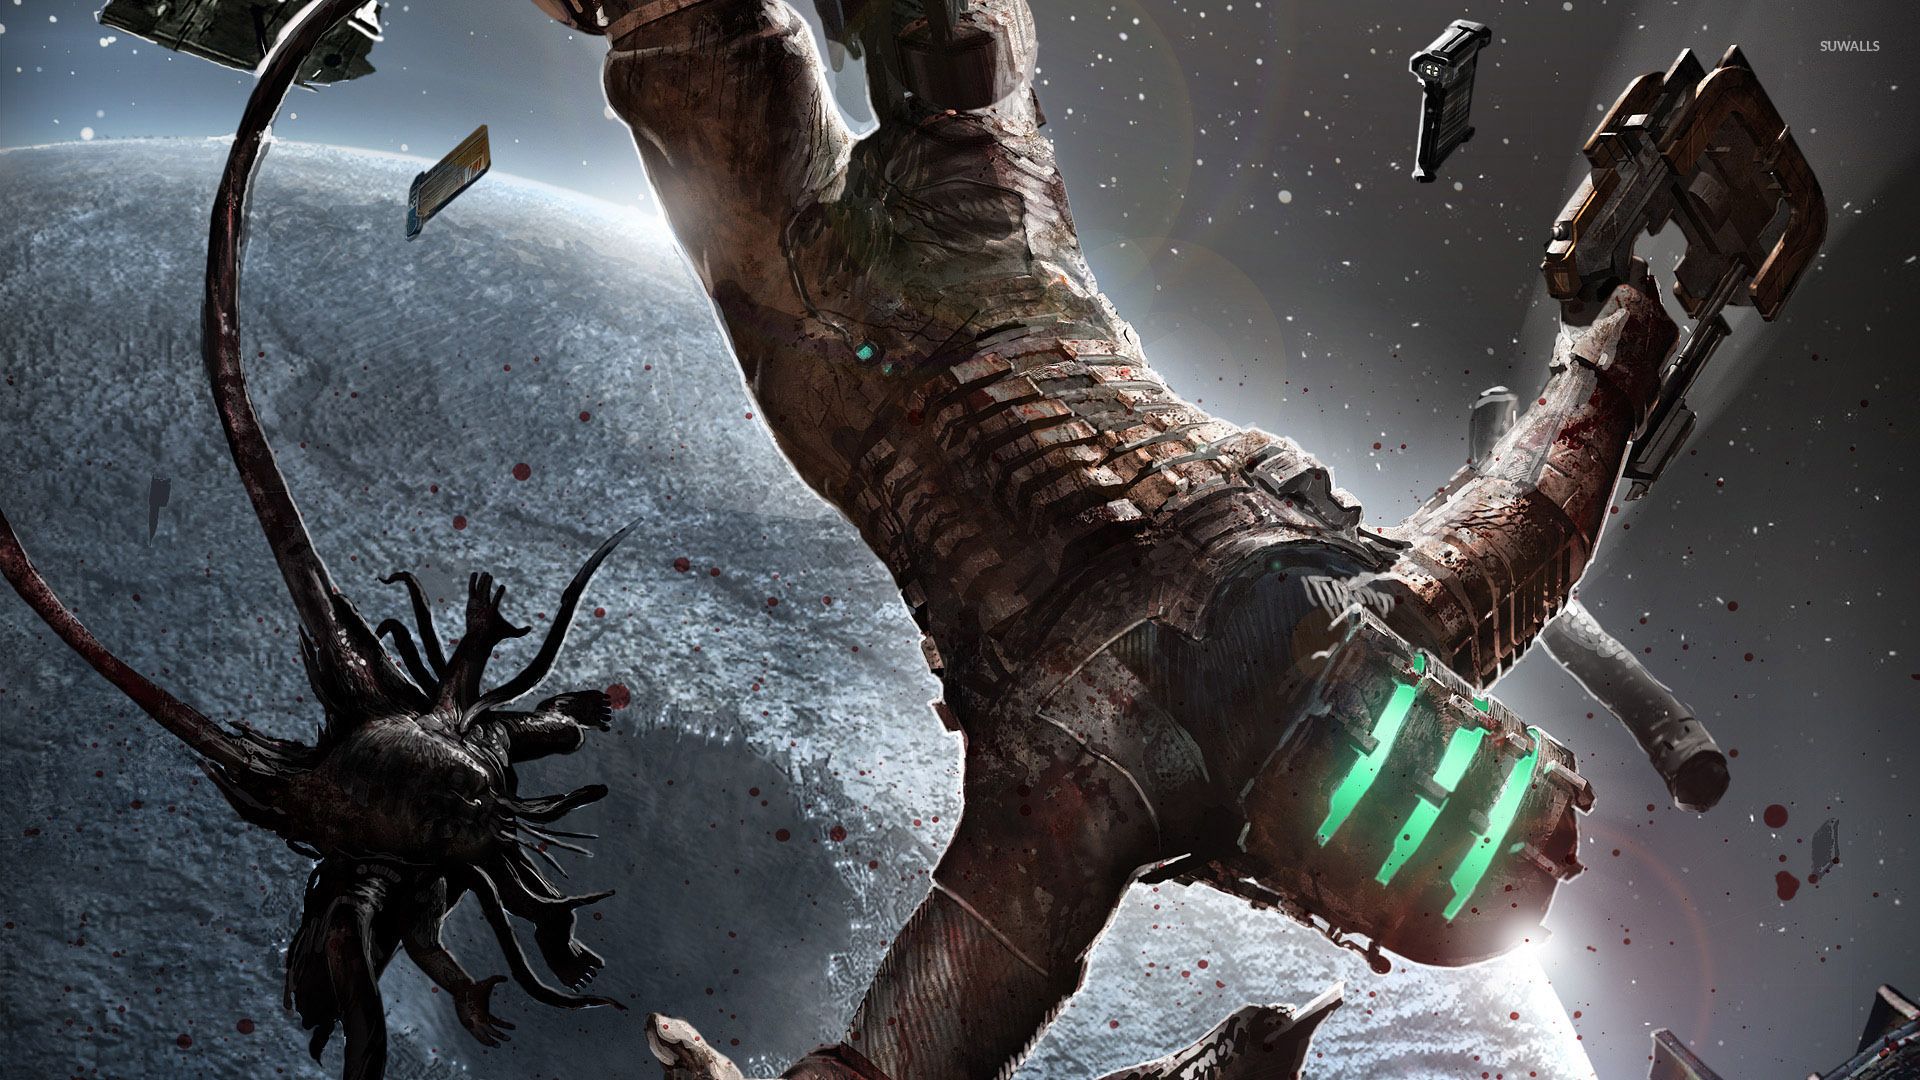 Dead Space remake will be released on January 27, 2023